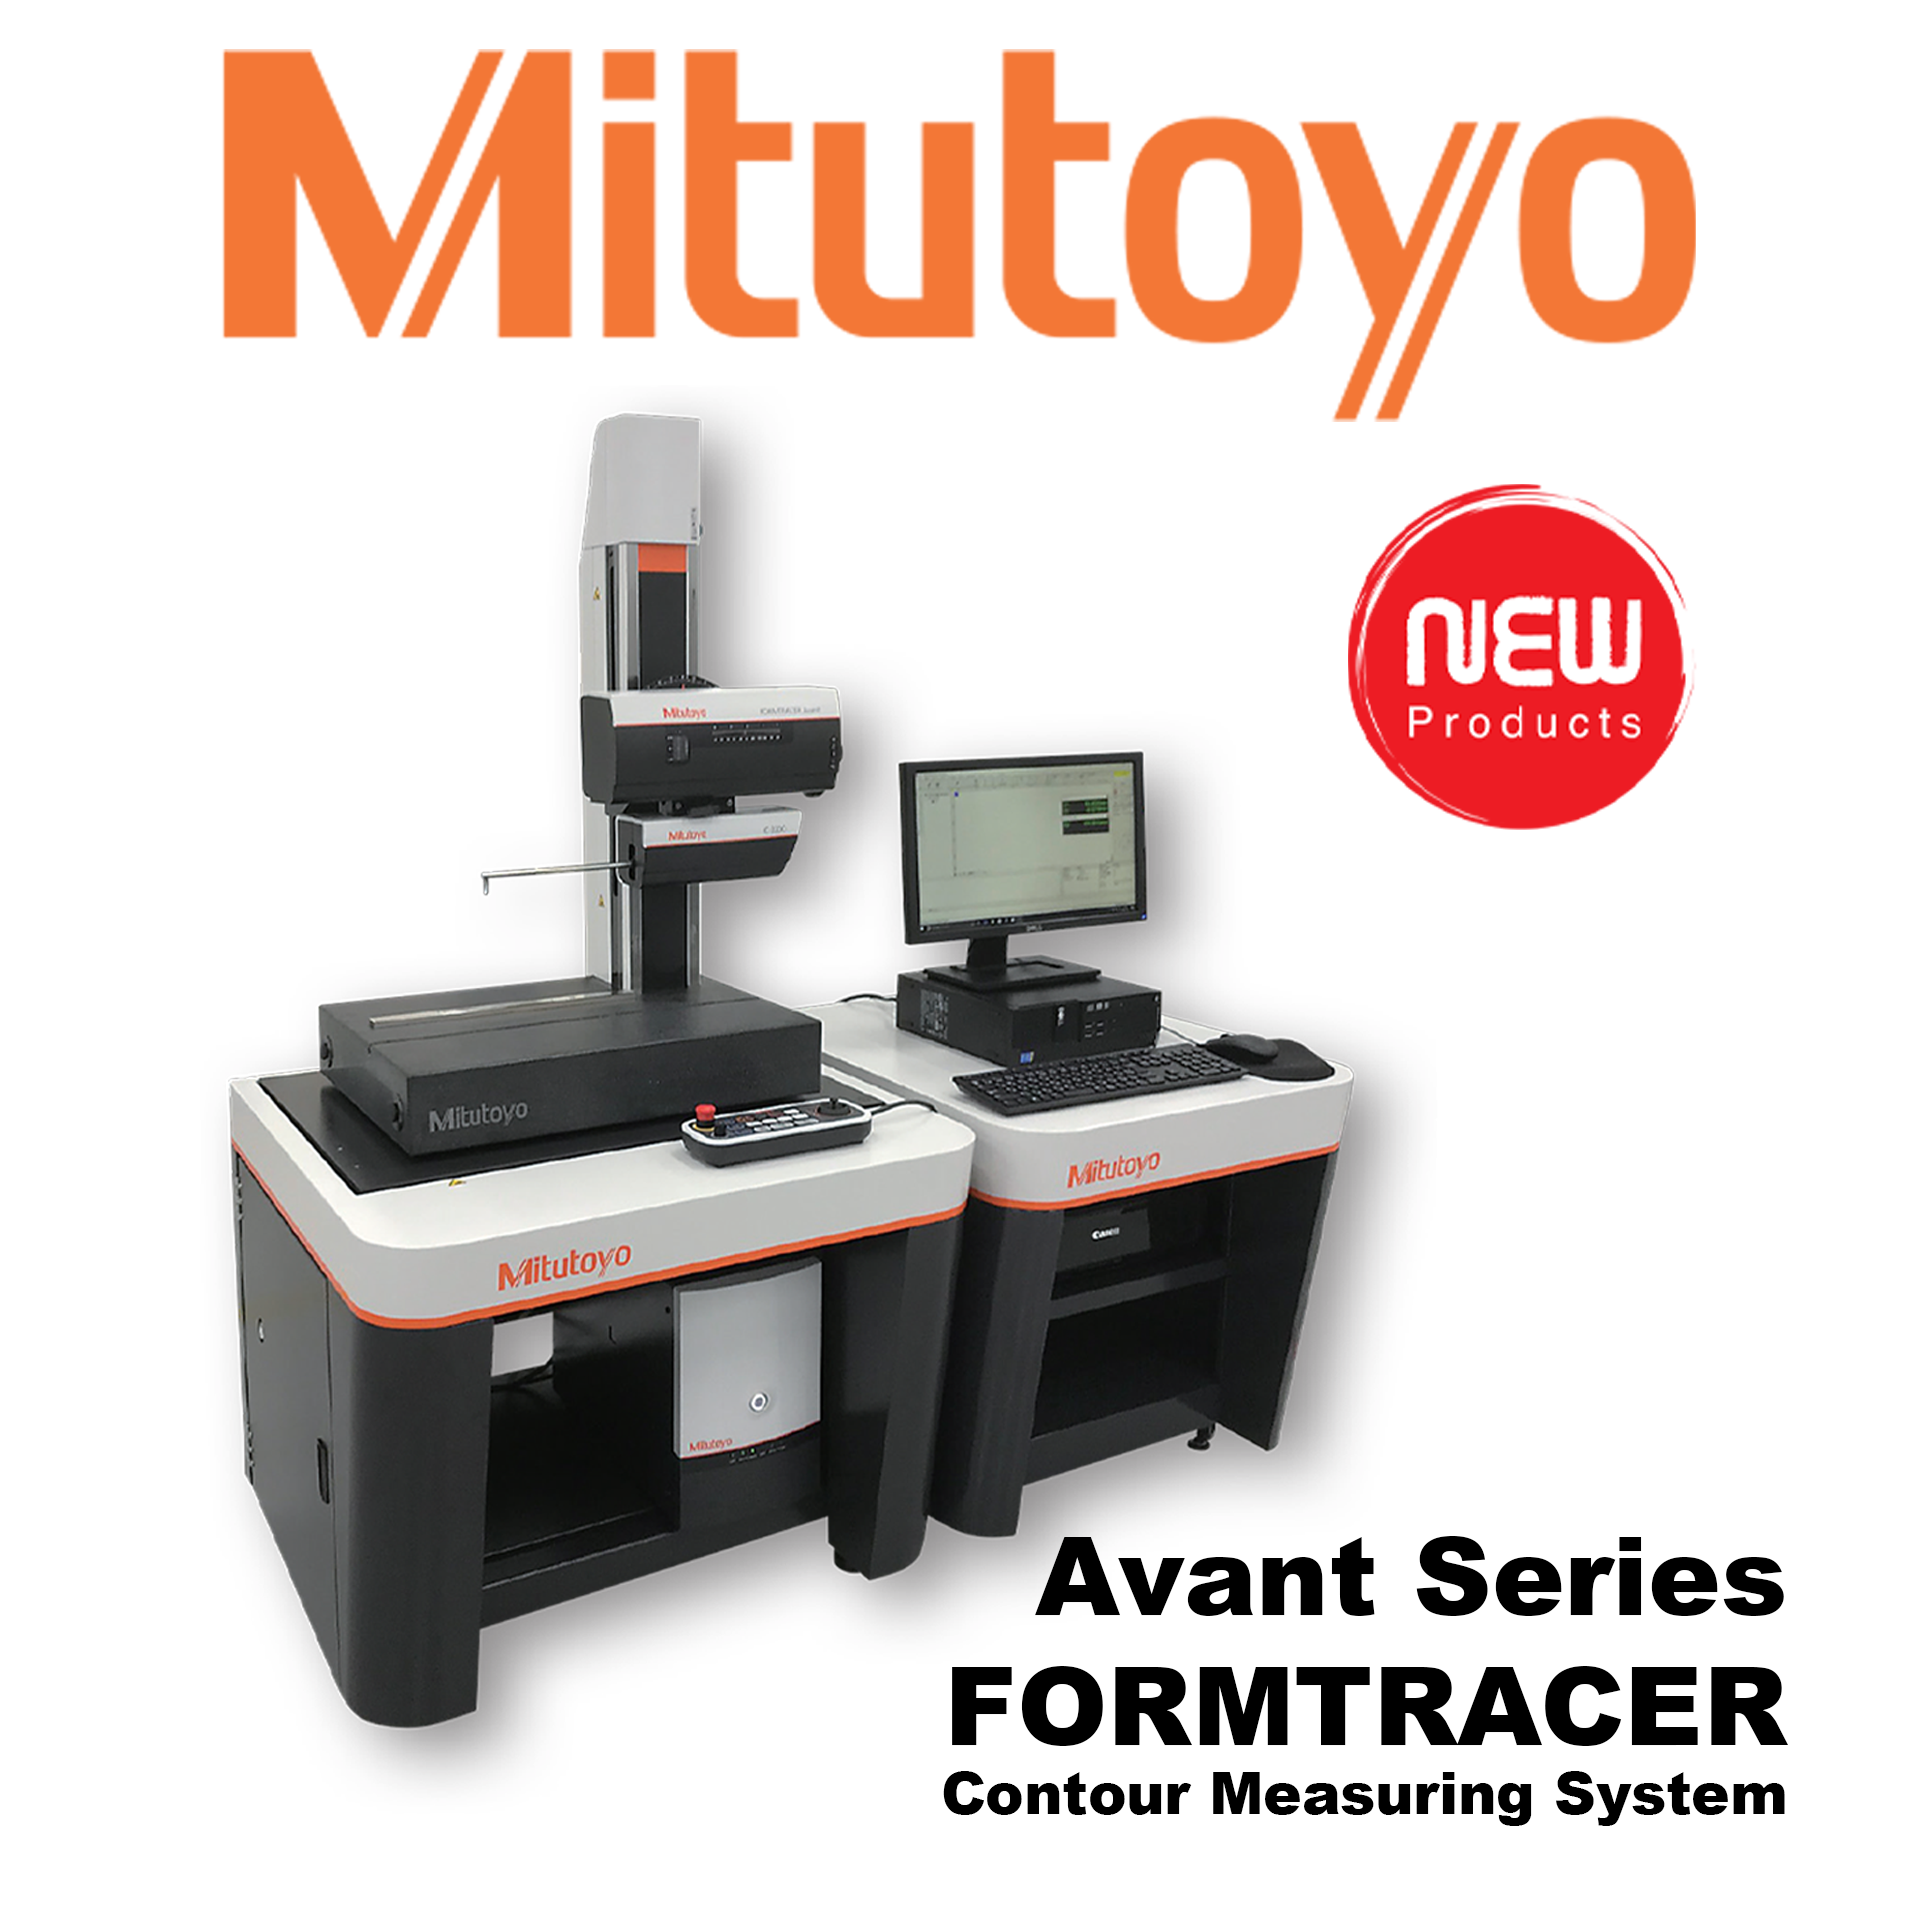 Mitutoyo's NEW Avant Series FORMTRACER